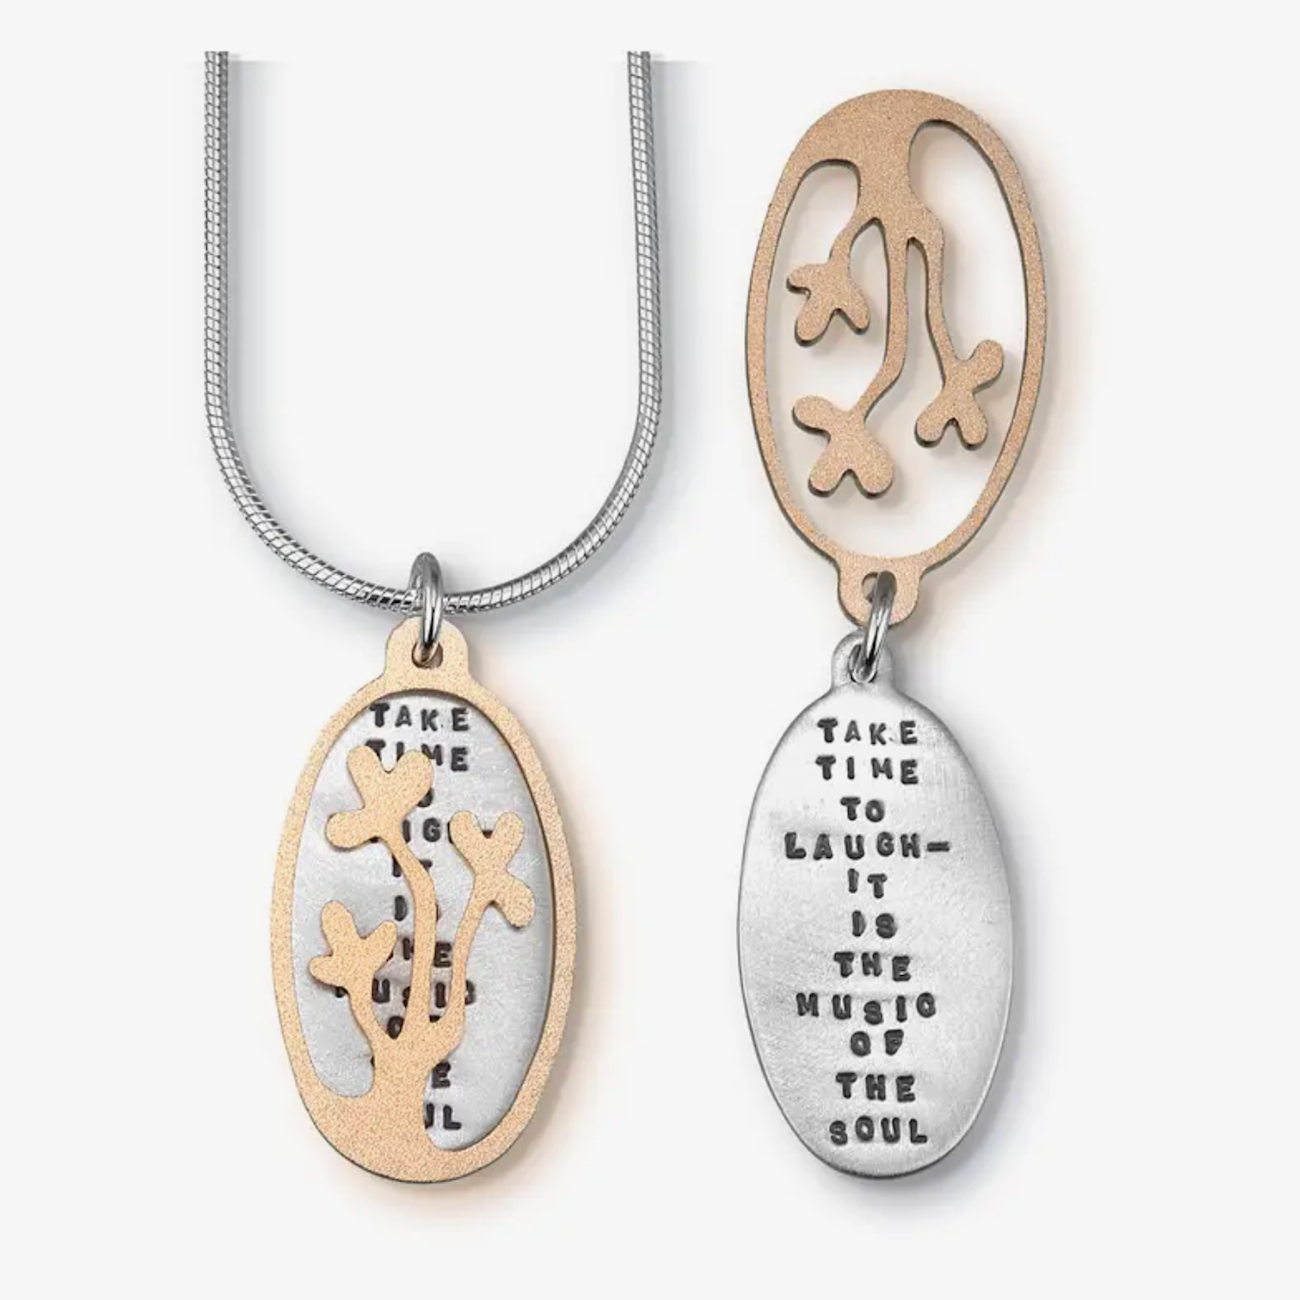 Laughter is the Music of the Soul Pendant - Heart of the Home PA